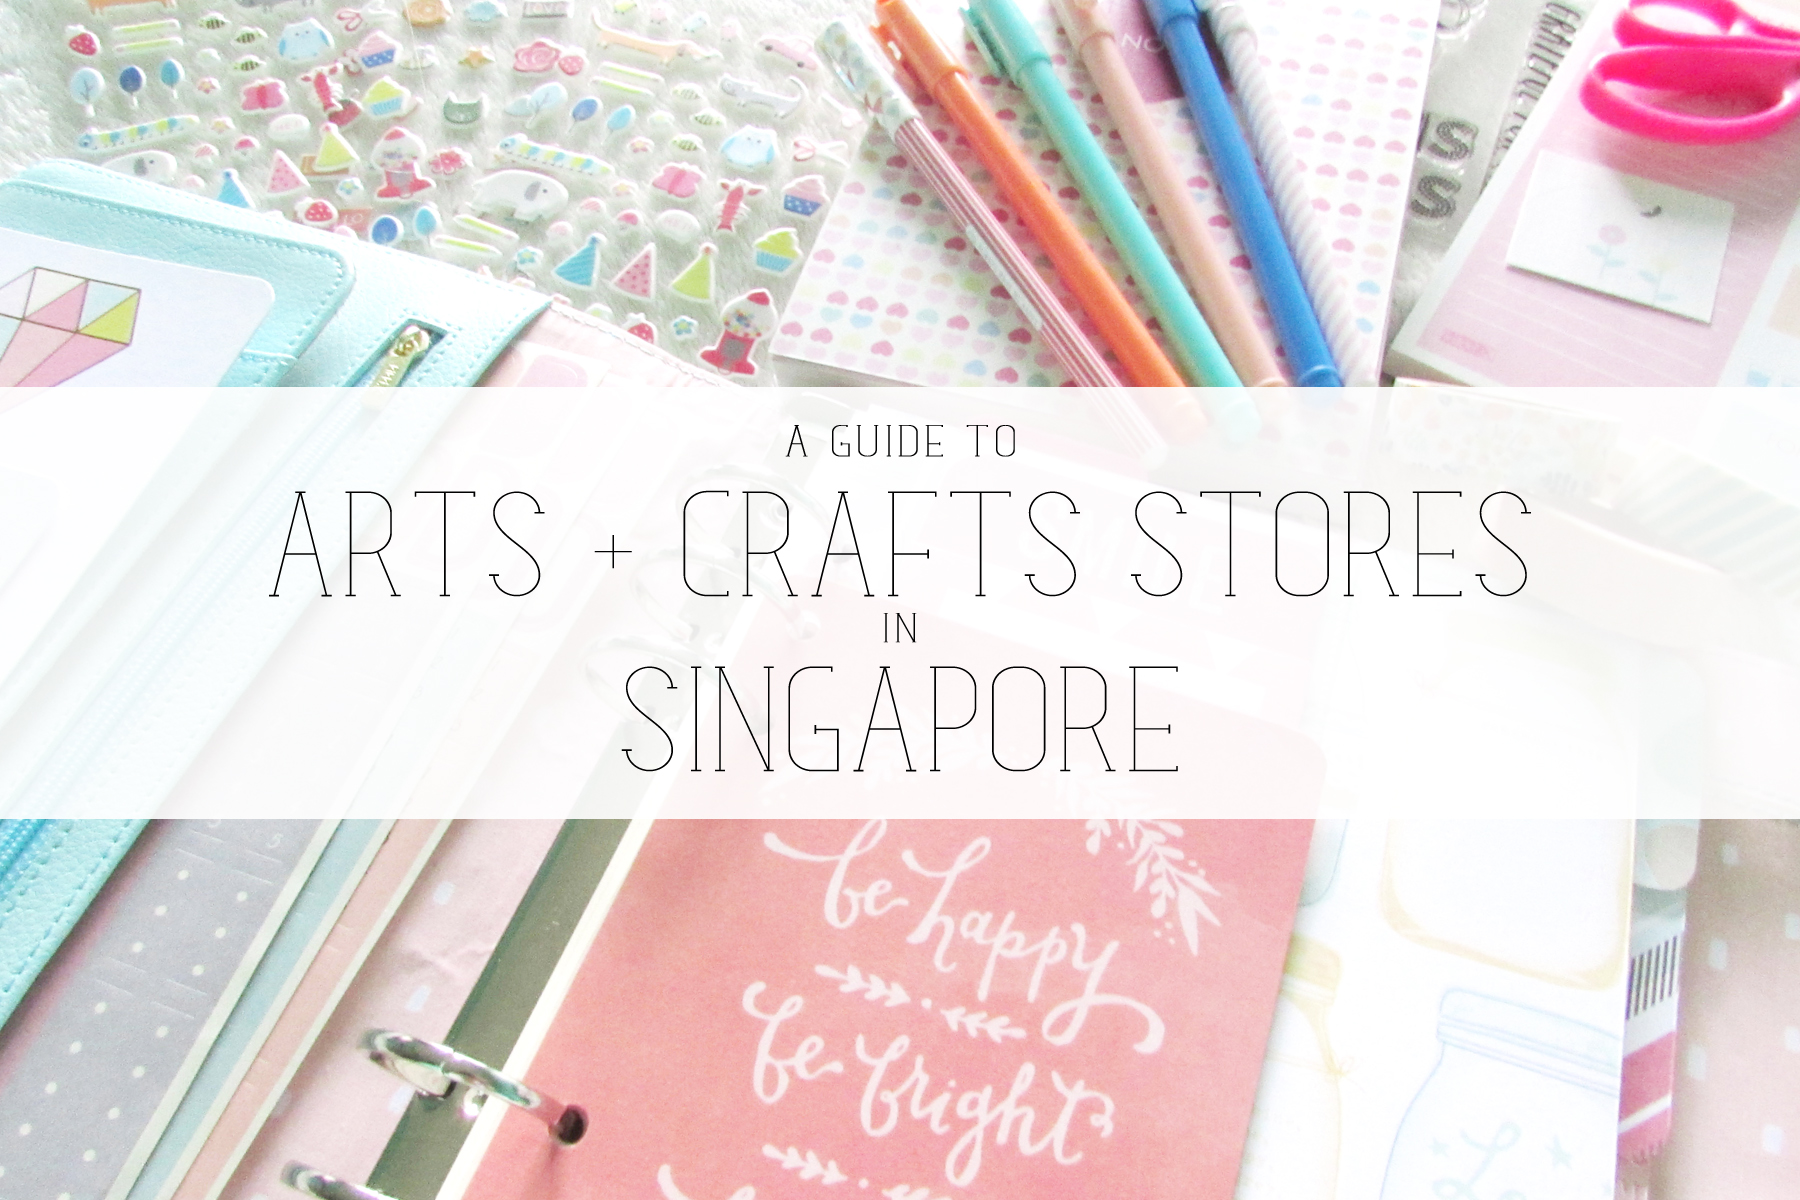 a guide to arts + crafts stores in singapore